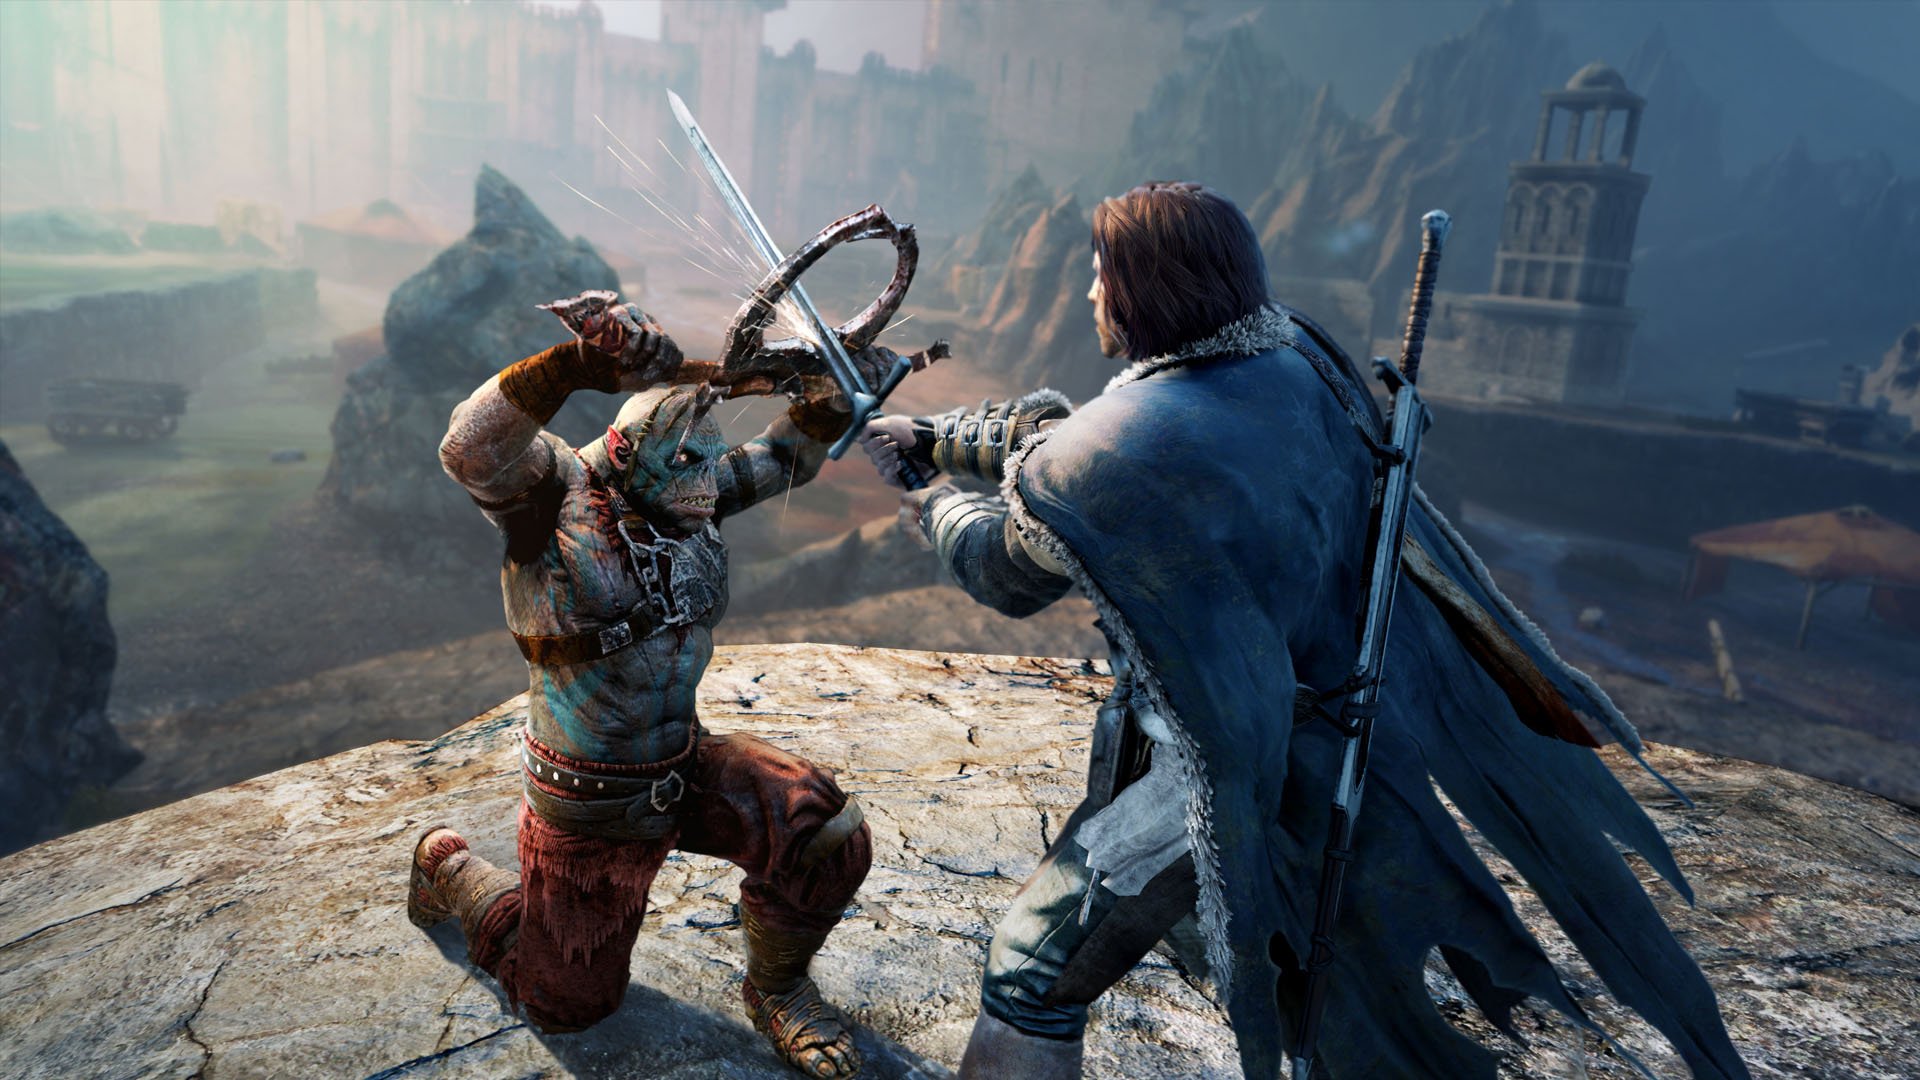 Shadow Of Mordor: New Skin + Game Mode! 